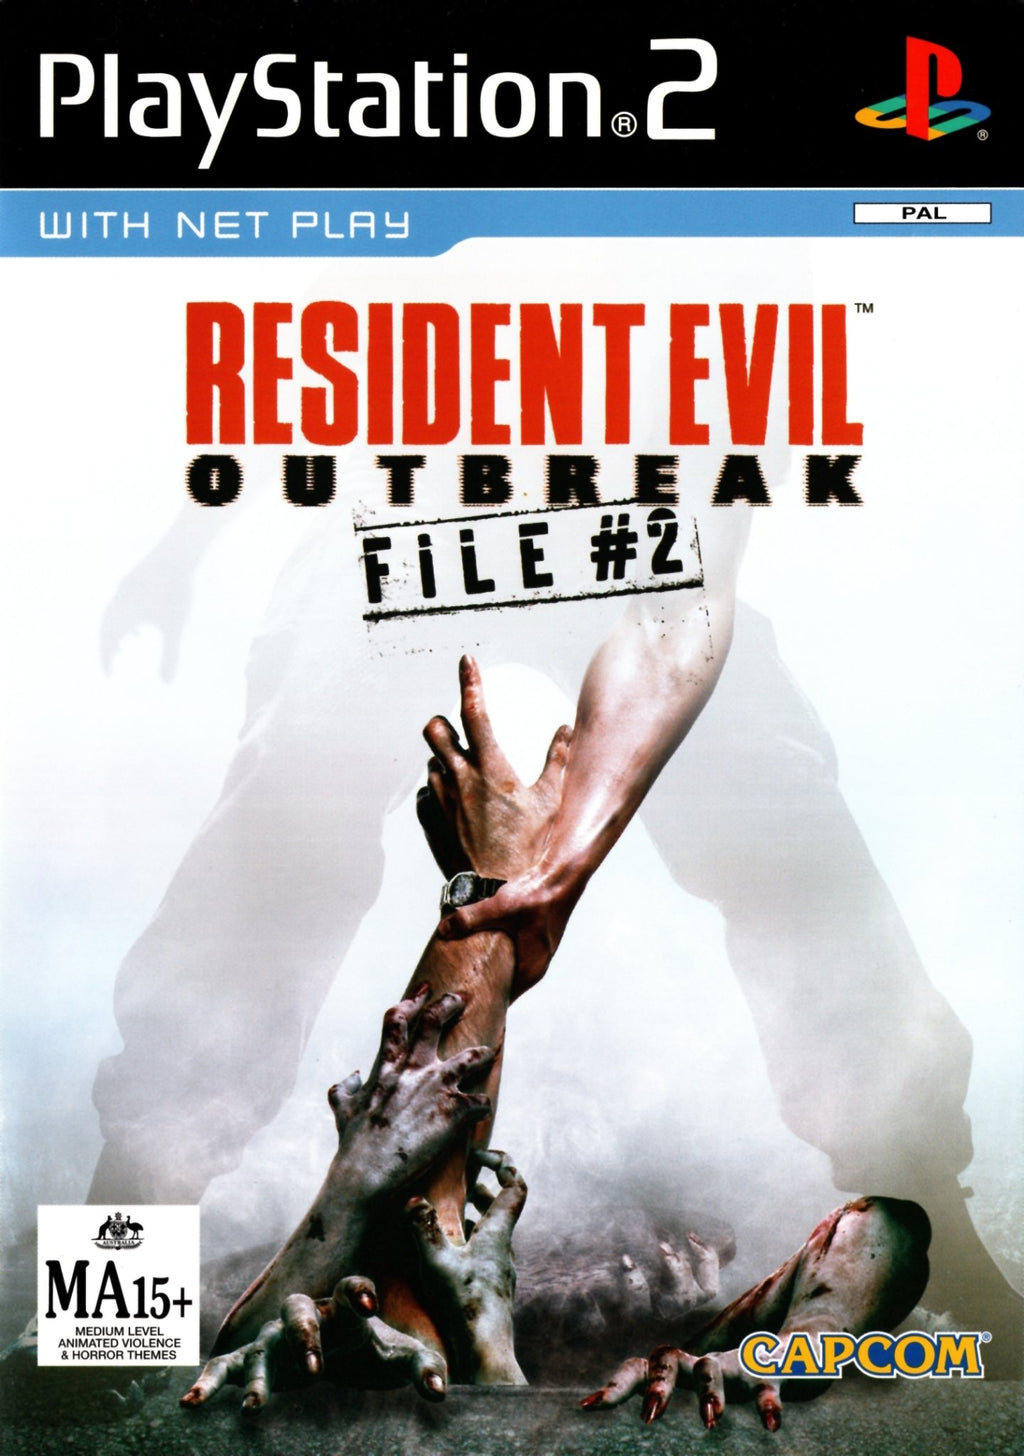 Game | Sony PlayStation PS2 |  Resident Evil Outbreak: File #2